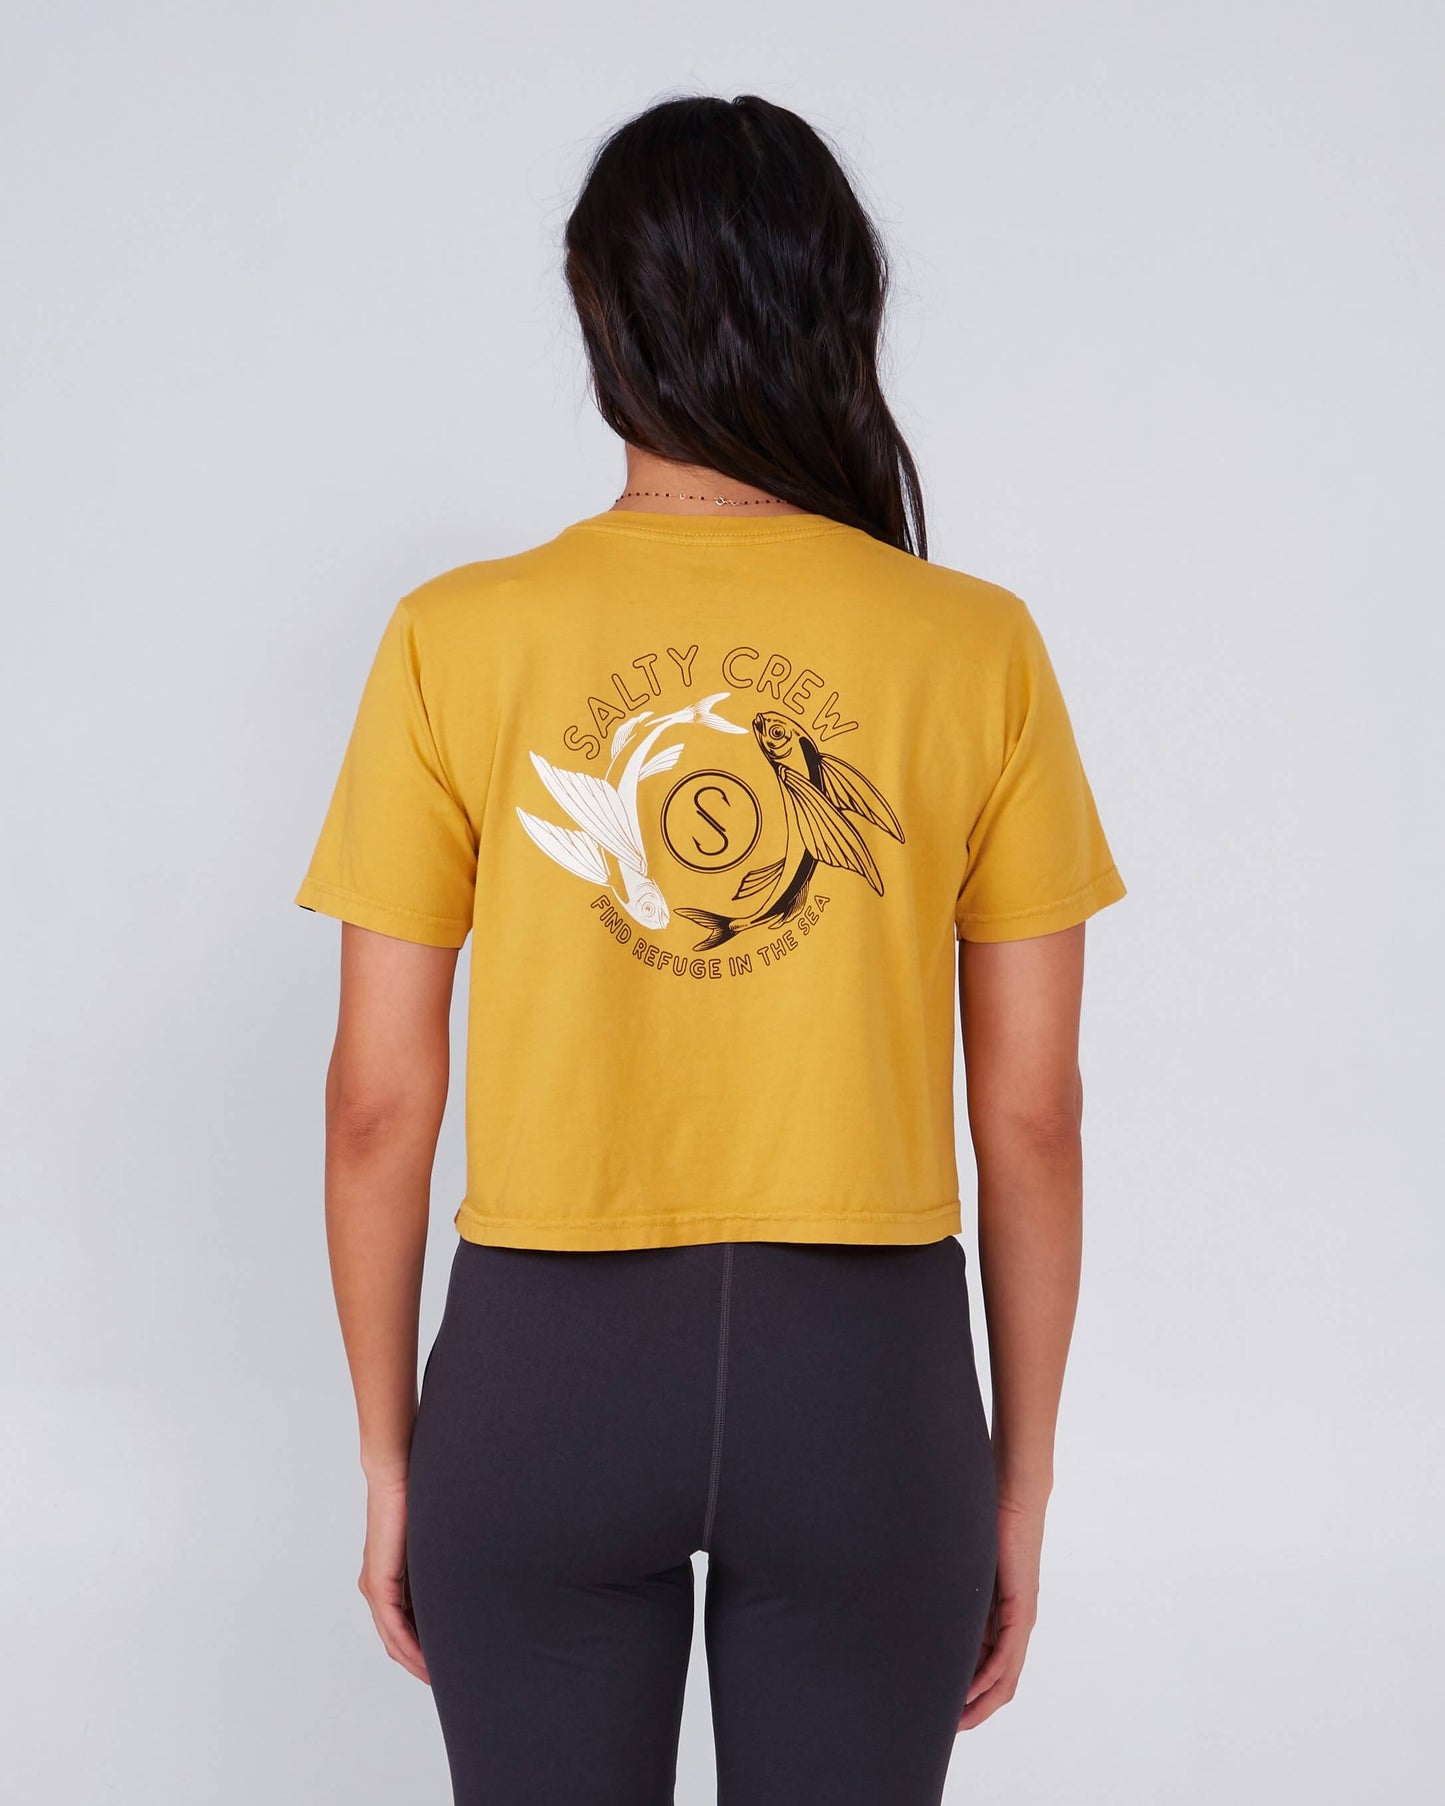 Salty Crew Womens - Fin And Yang Crop Tee - Baked Yellow